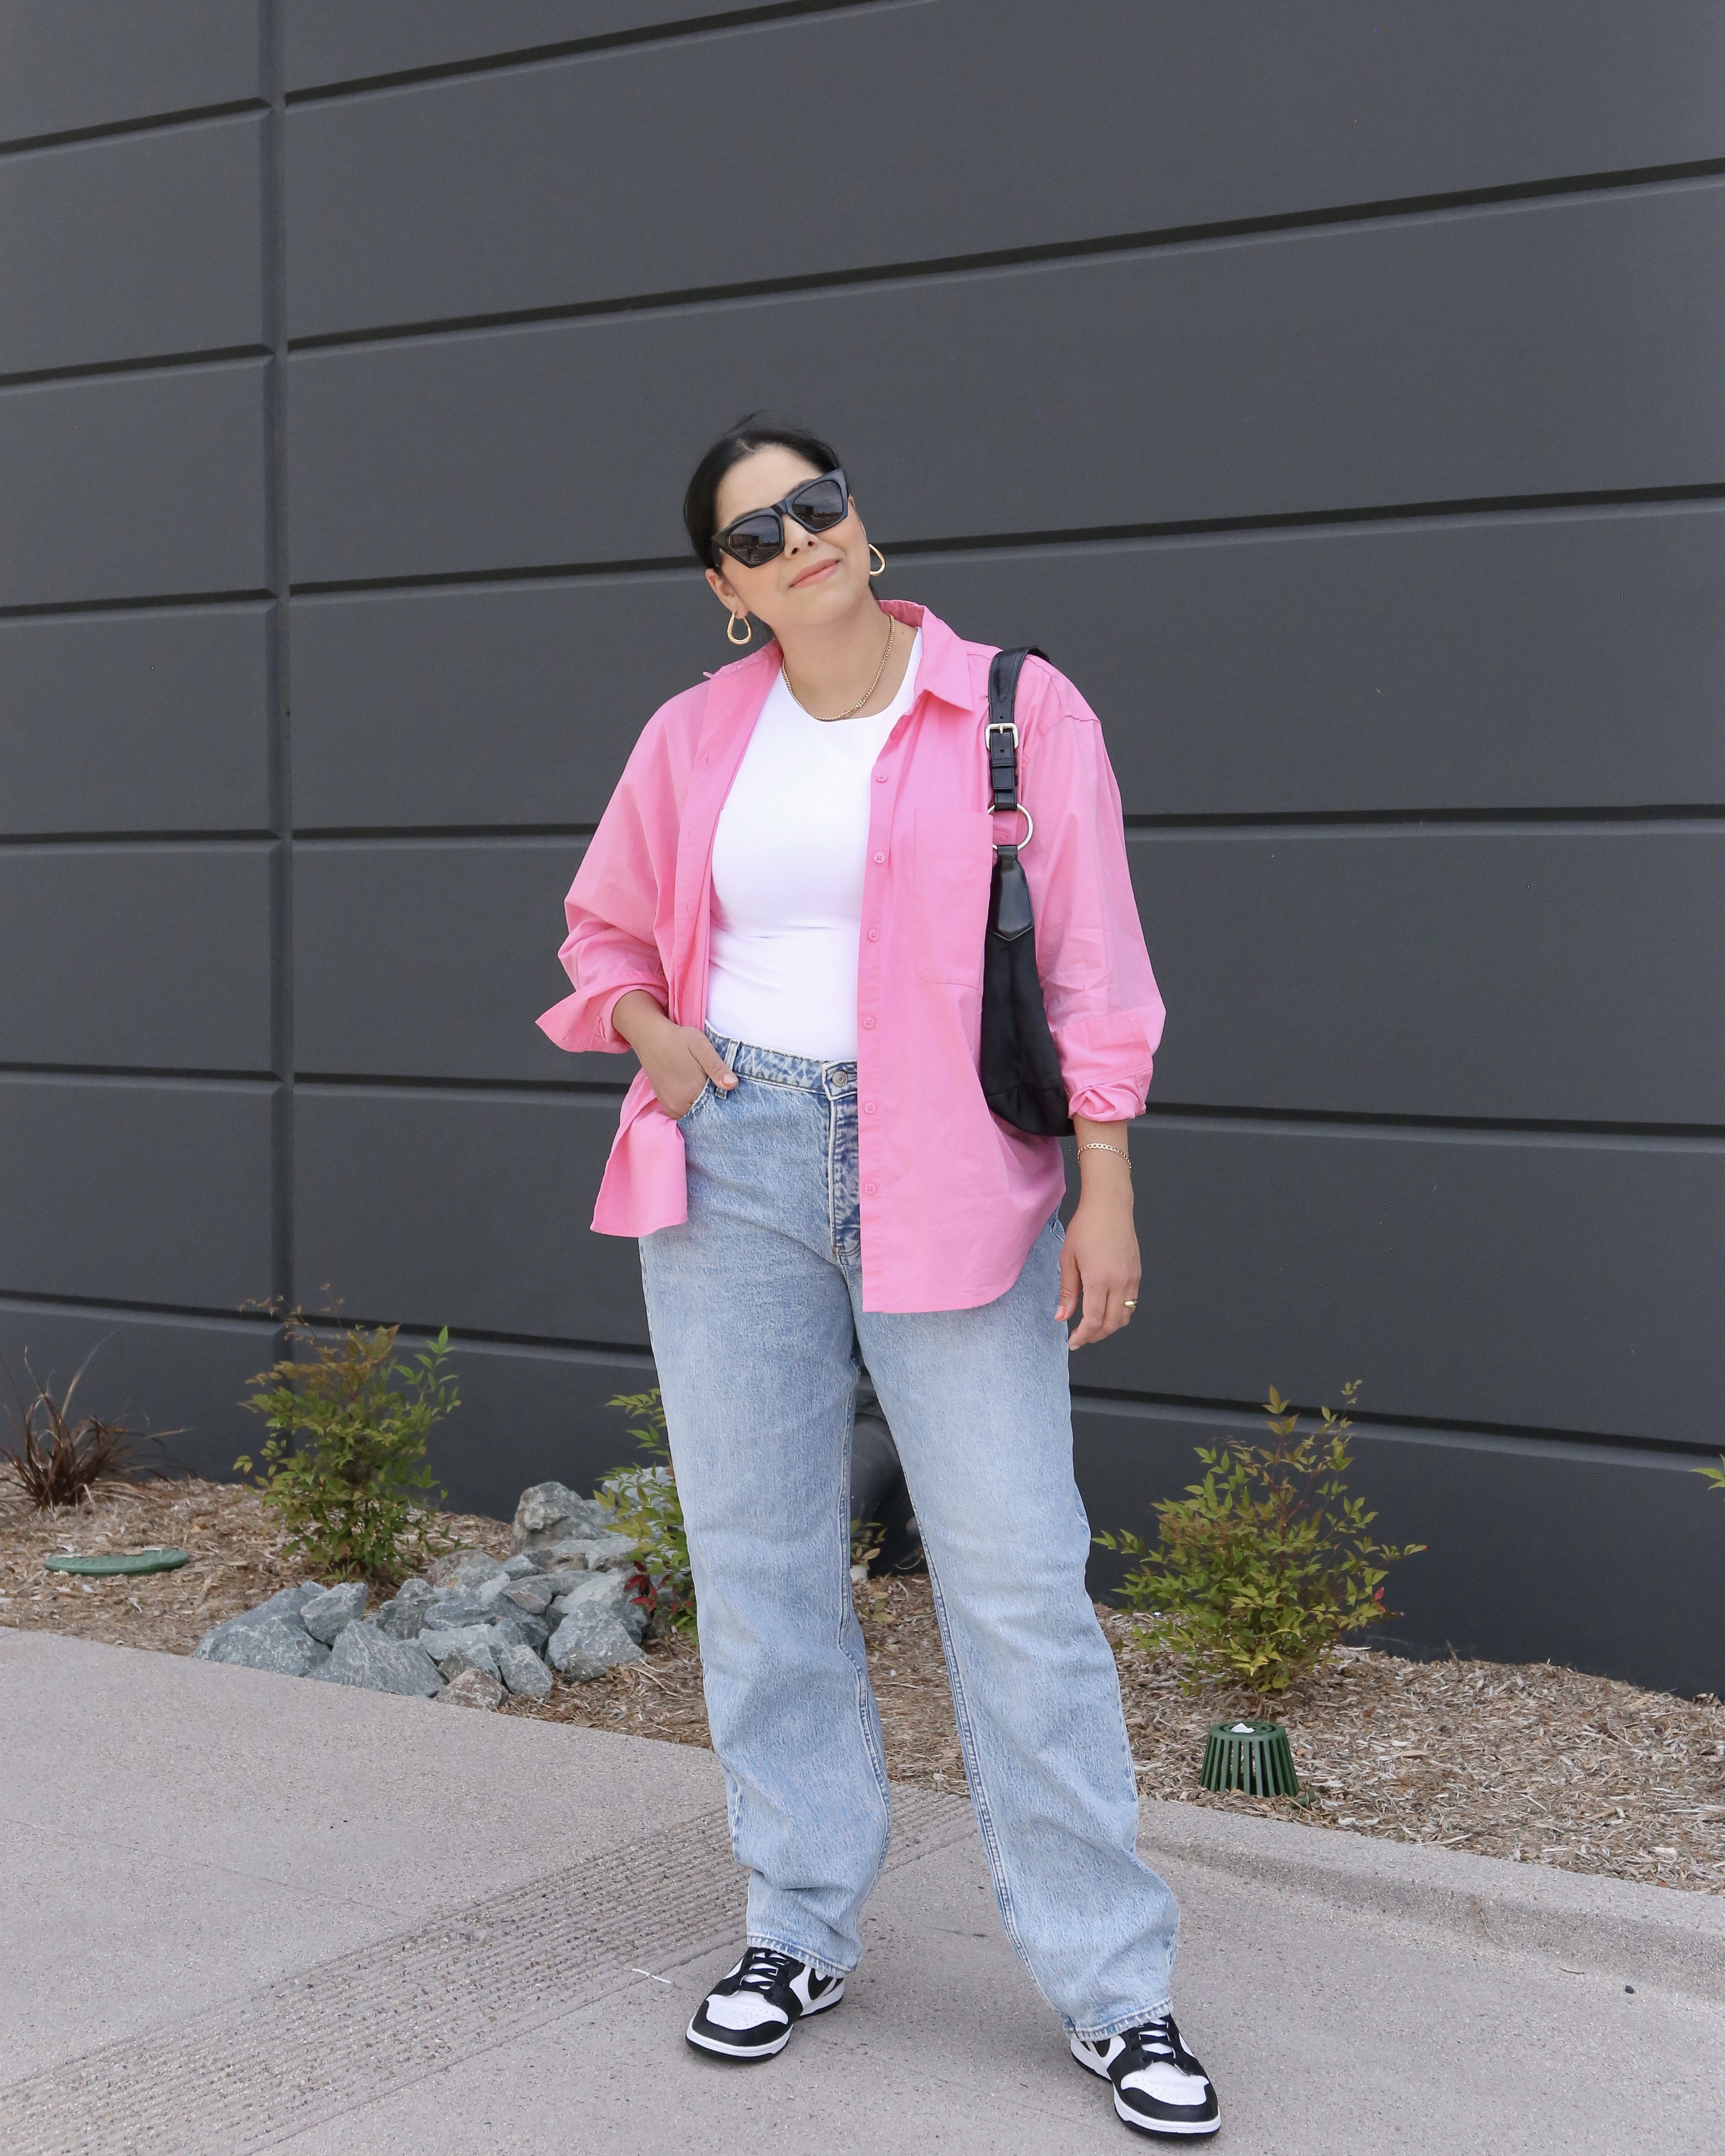 Casual Women's Outfit with baggy jeans, how to style baggy jeans, latina style blogger 2022